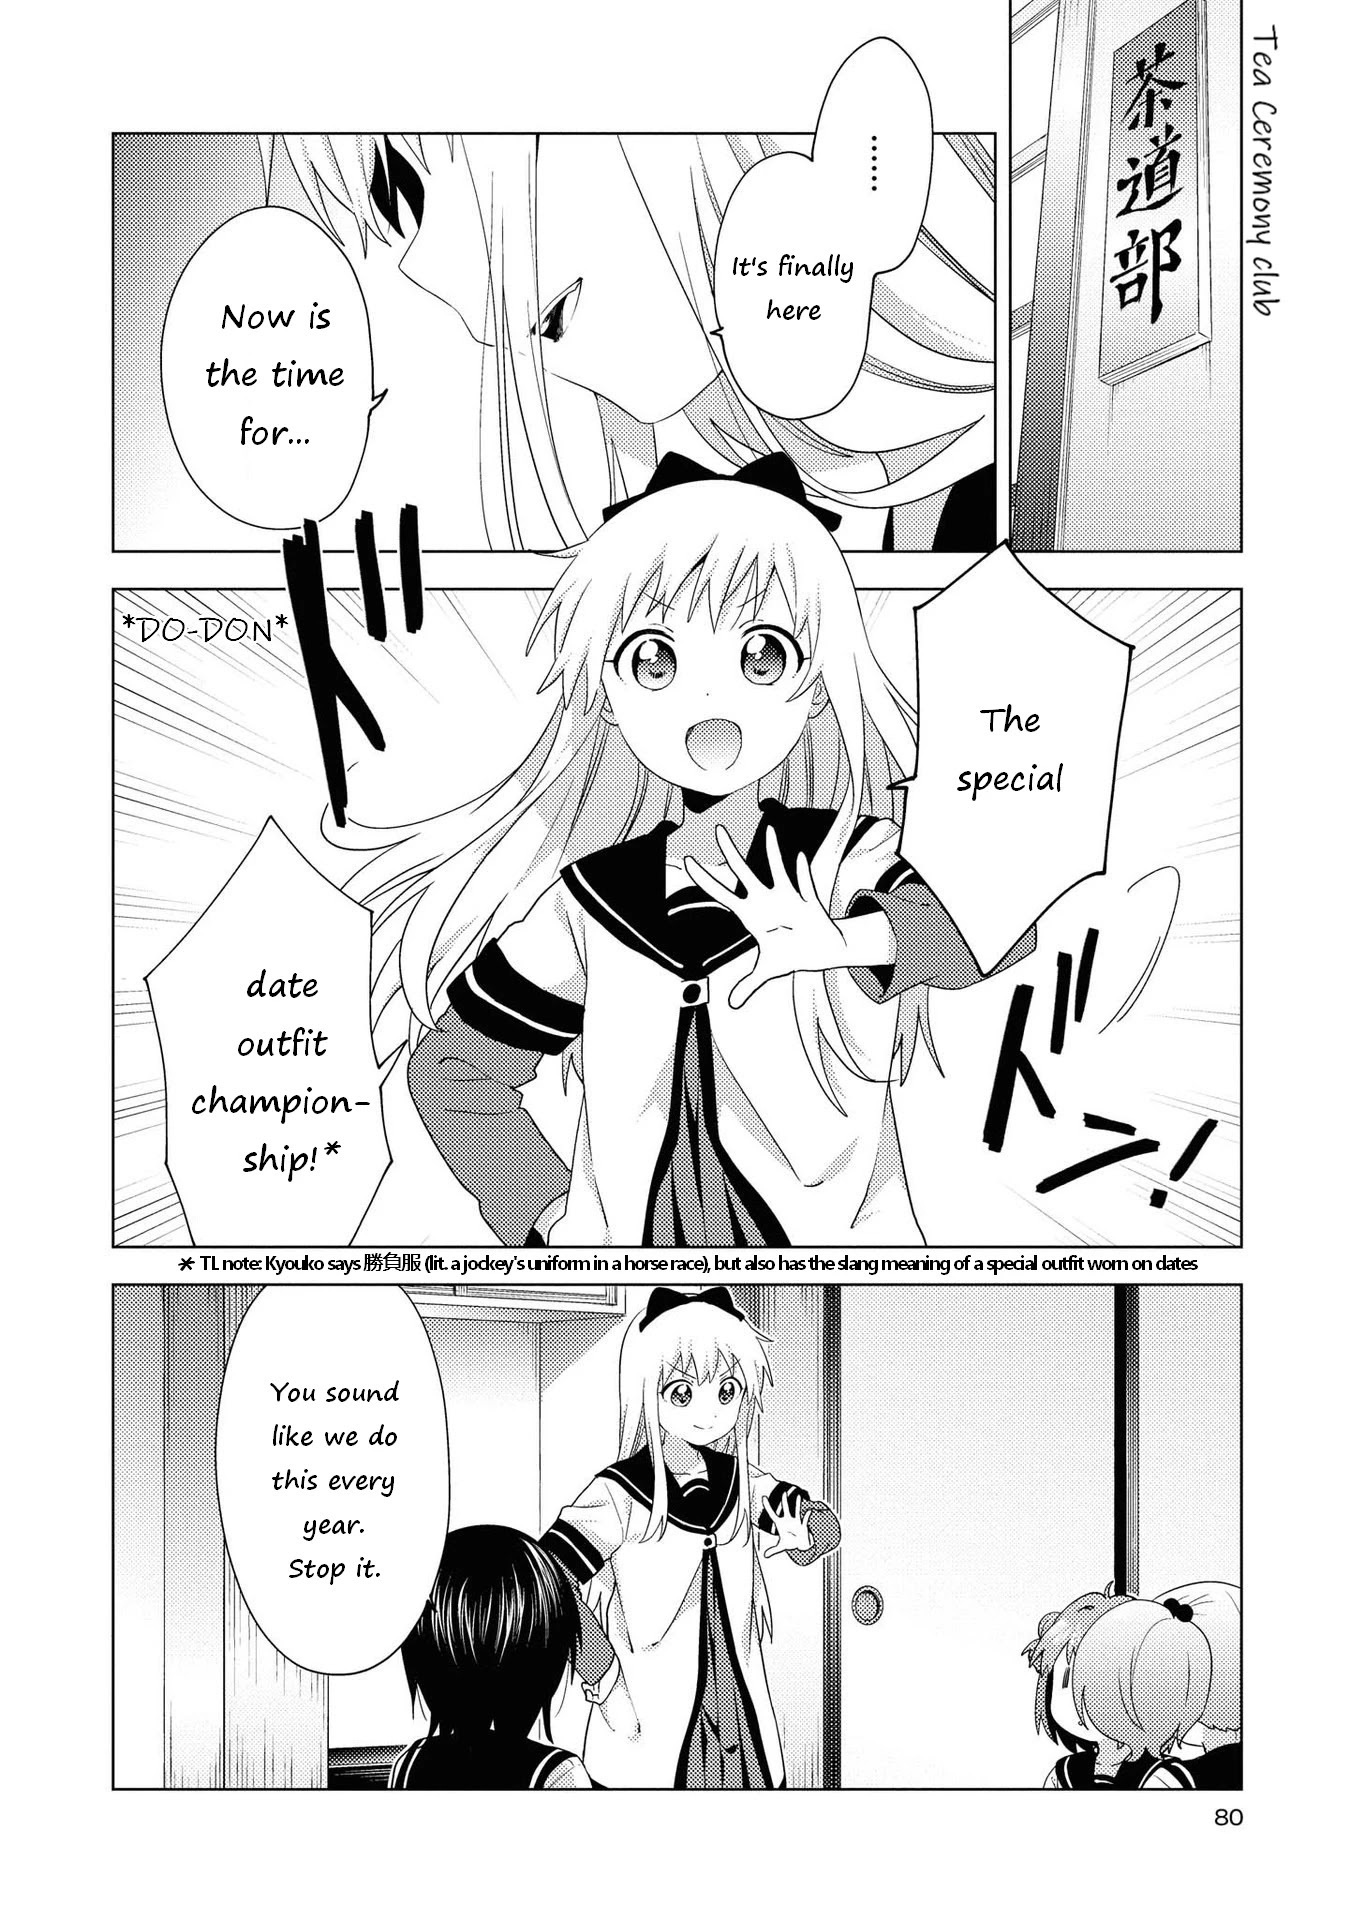 Yuru Yuri Chapter 164: Special Date Outfit! - Picture 2